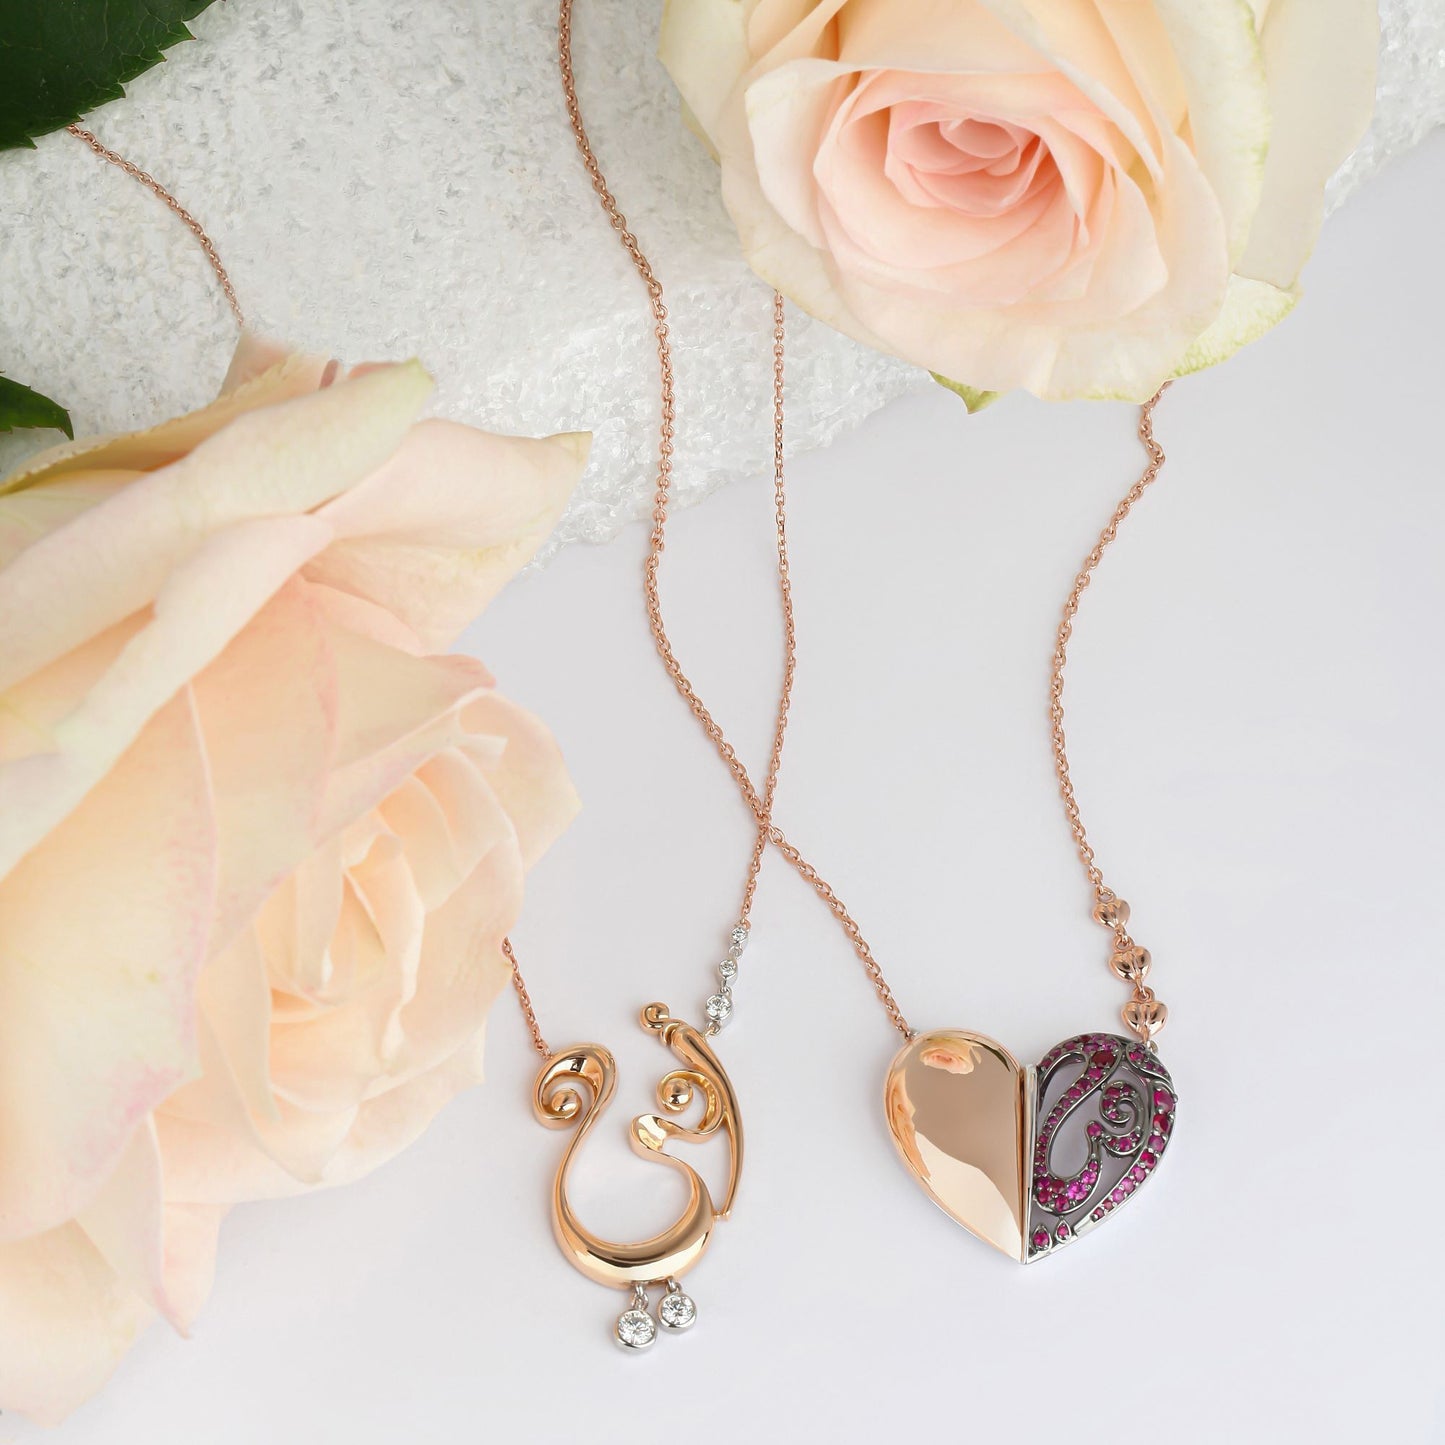 The Mothers' Day Edition - Custom Arabic Letter "Mother" Rose Gold & Diamond Necklace | Designer Jewellery Online